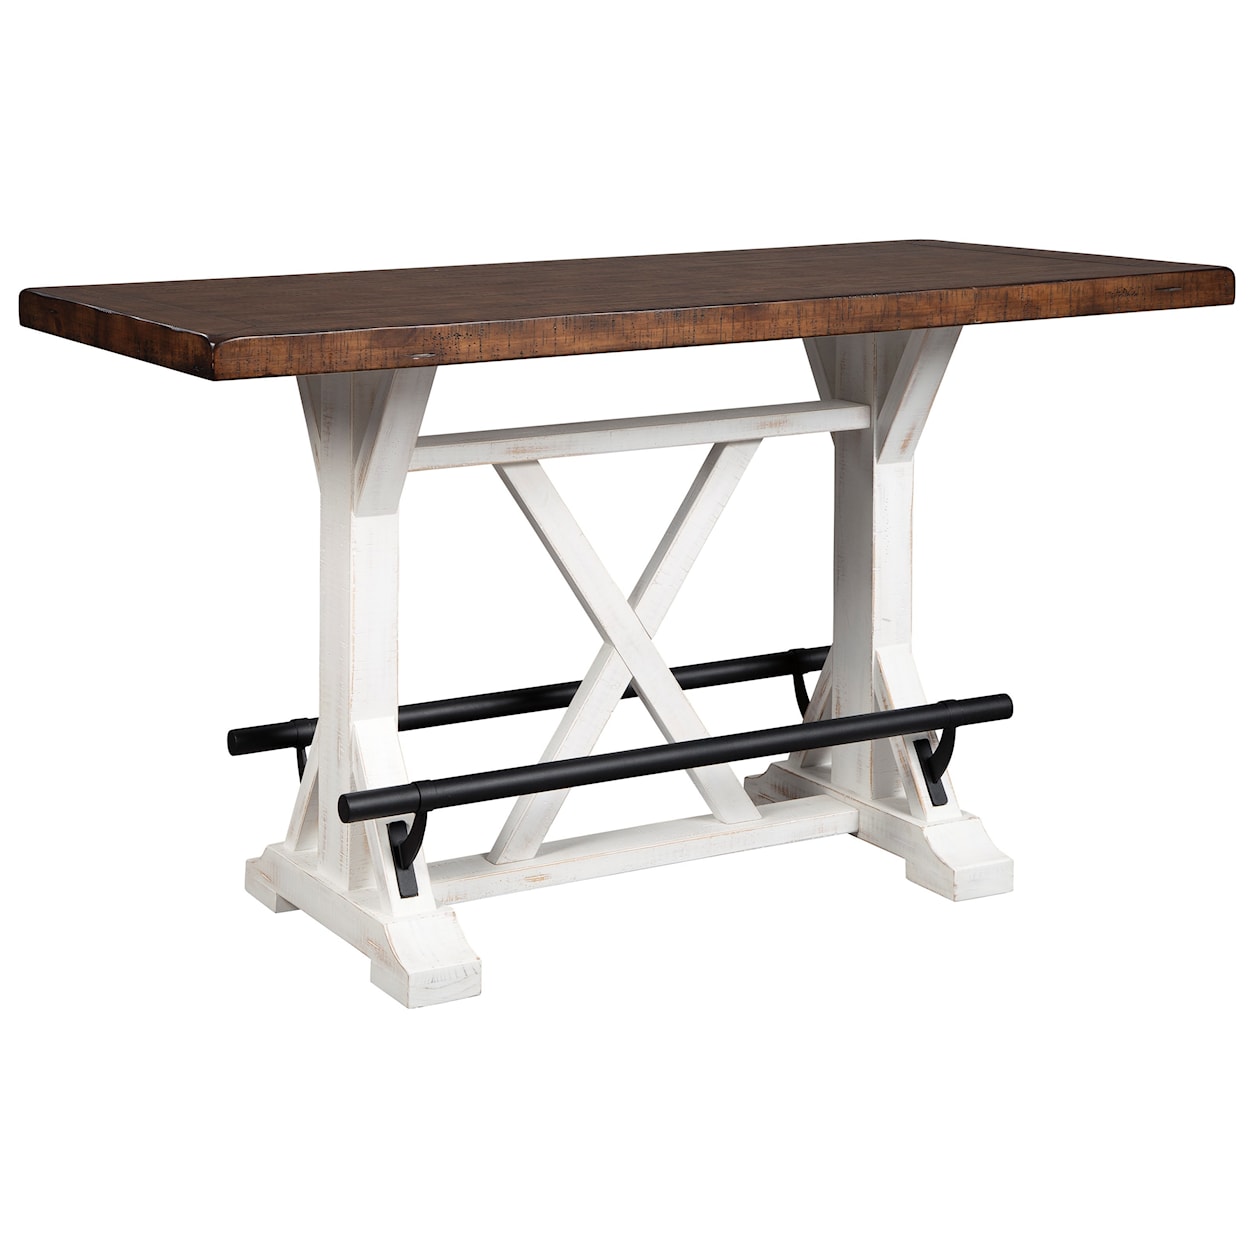 Benchcraft Valebeck Counter Height Dining Table